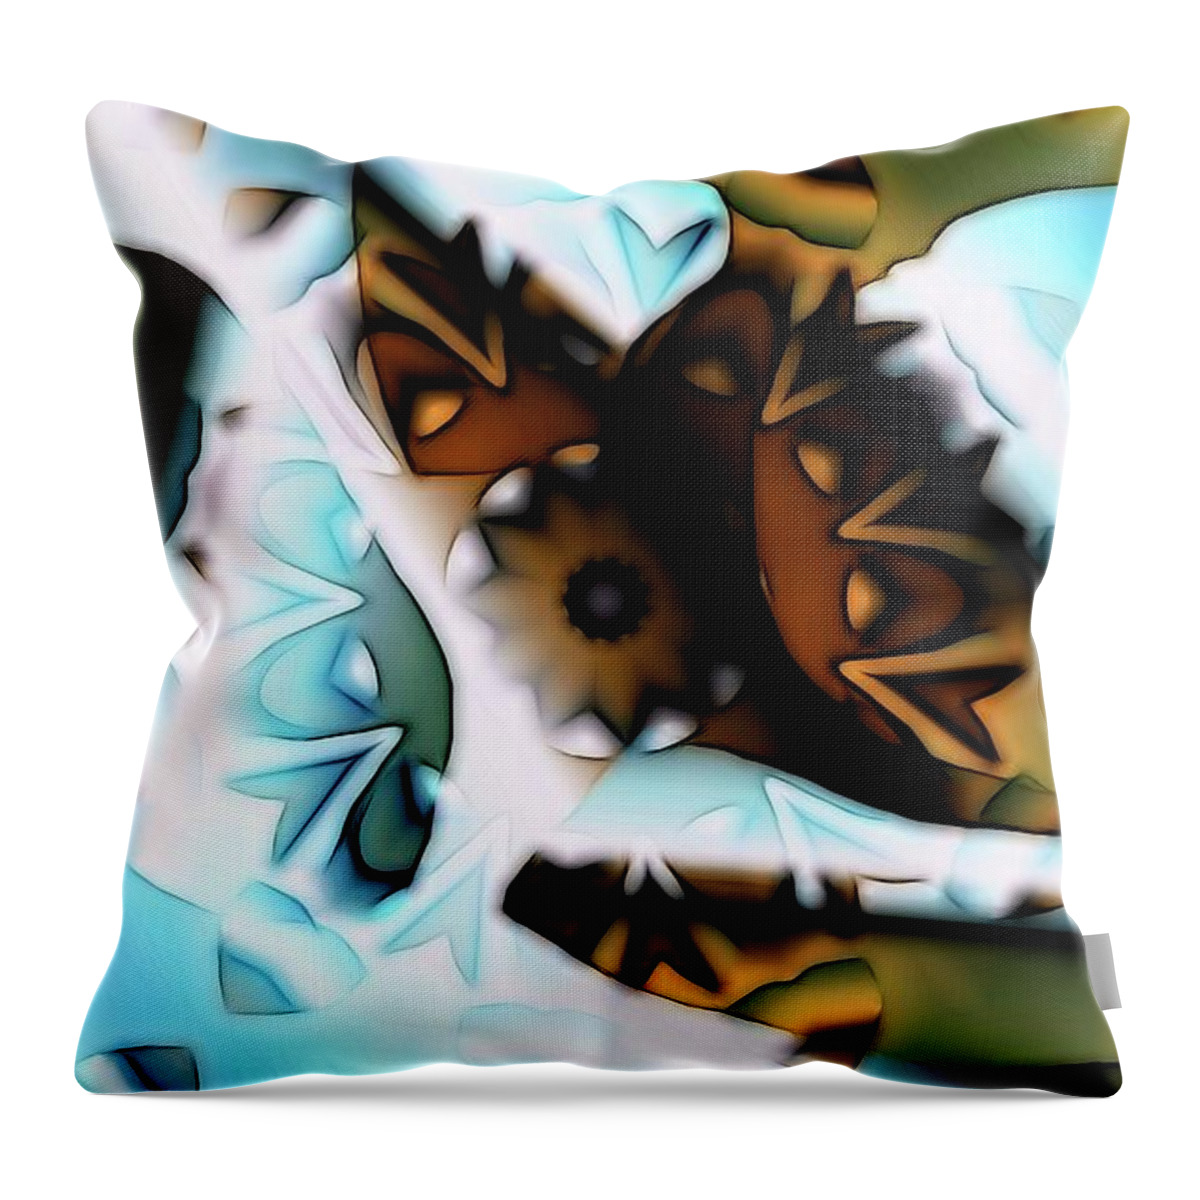 Abstract Throw Pillow featuring the digital art Discontinuous Permafrost by Ronald Bissett